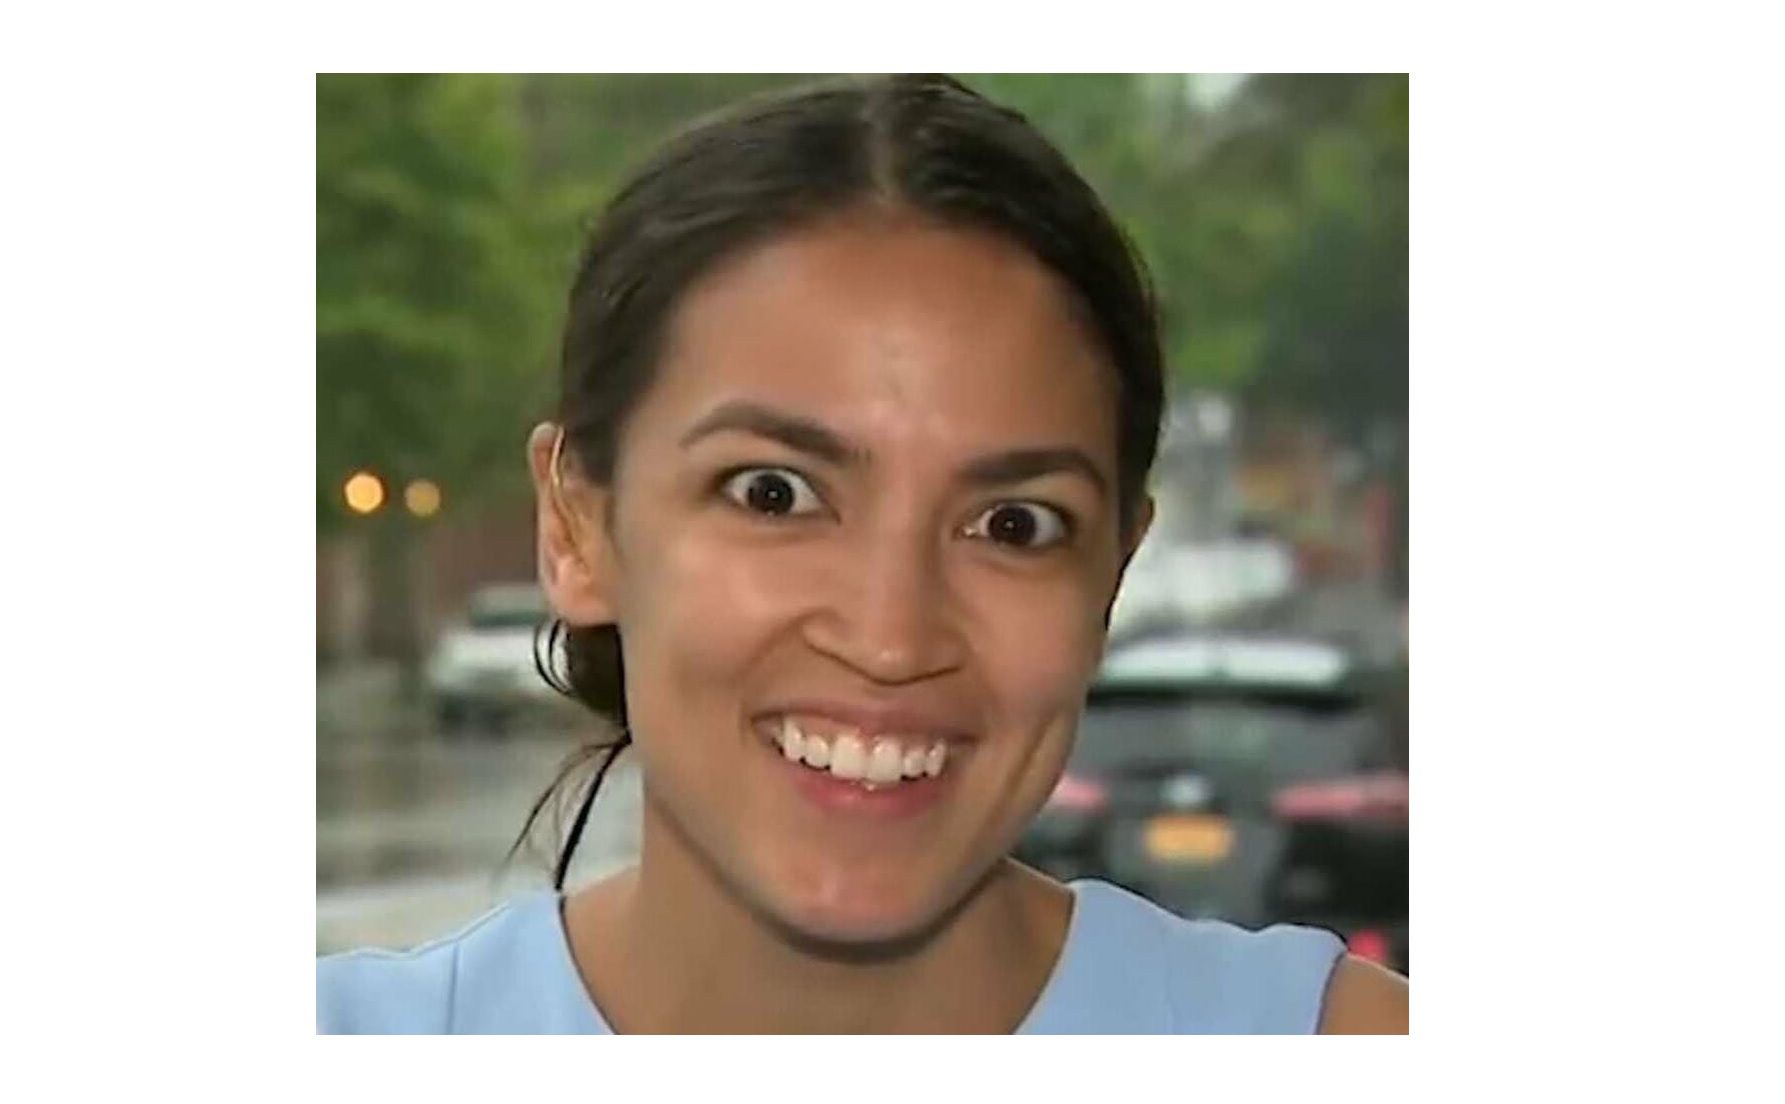 Resident Idiot of US House Spouts Off: AOC Slams Texas for Power Outages Due to Frozen Wind Turbines | The Gateway Pundit | by Jim Hoft